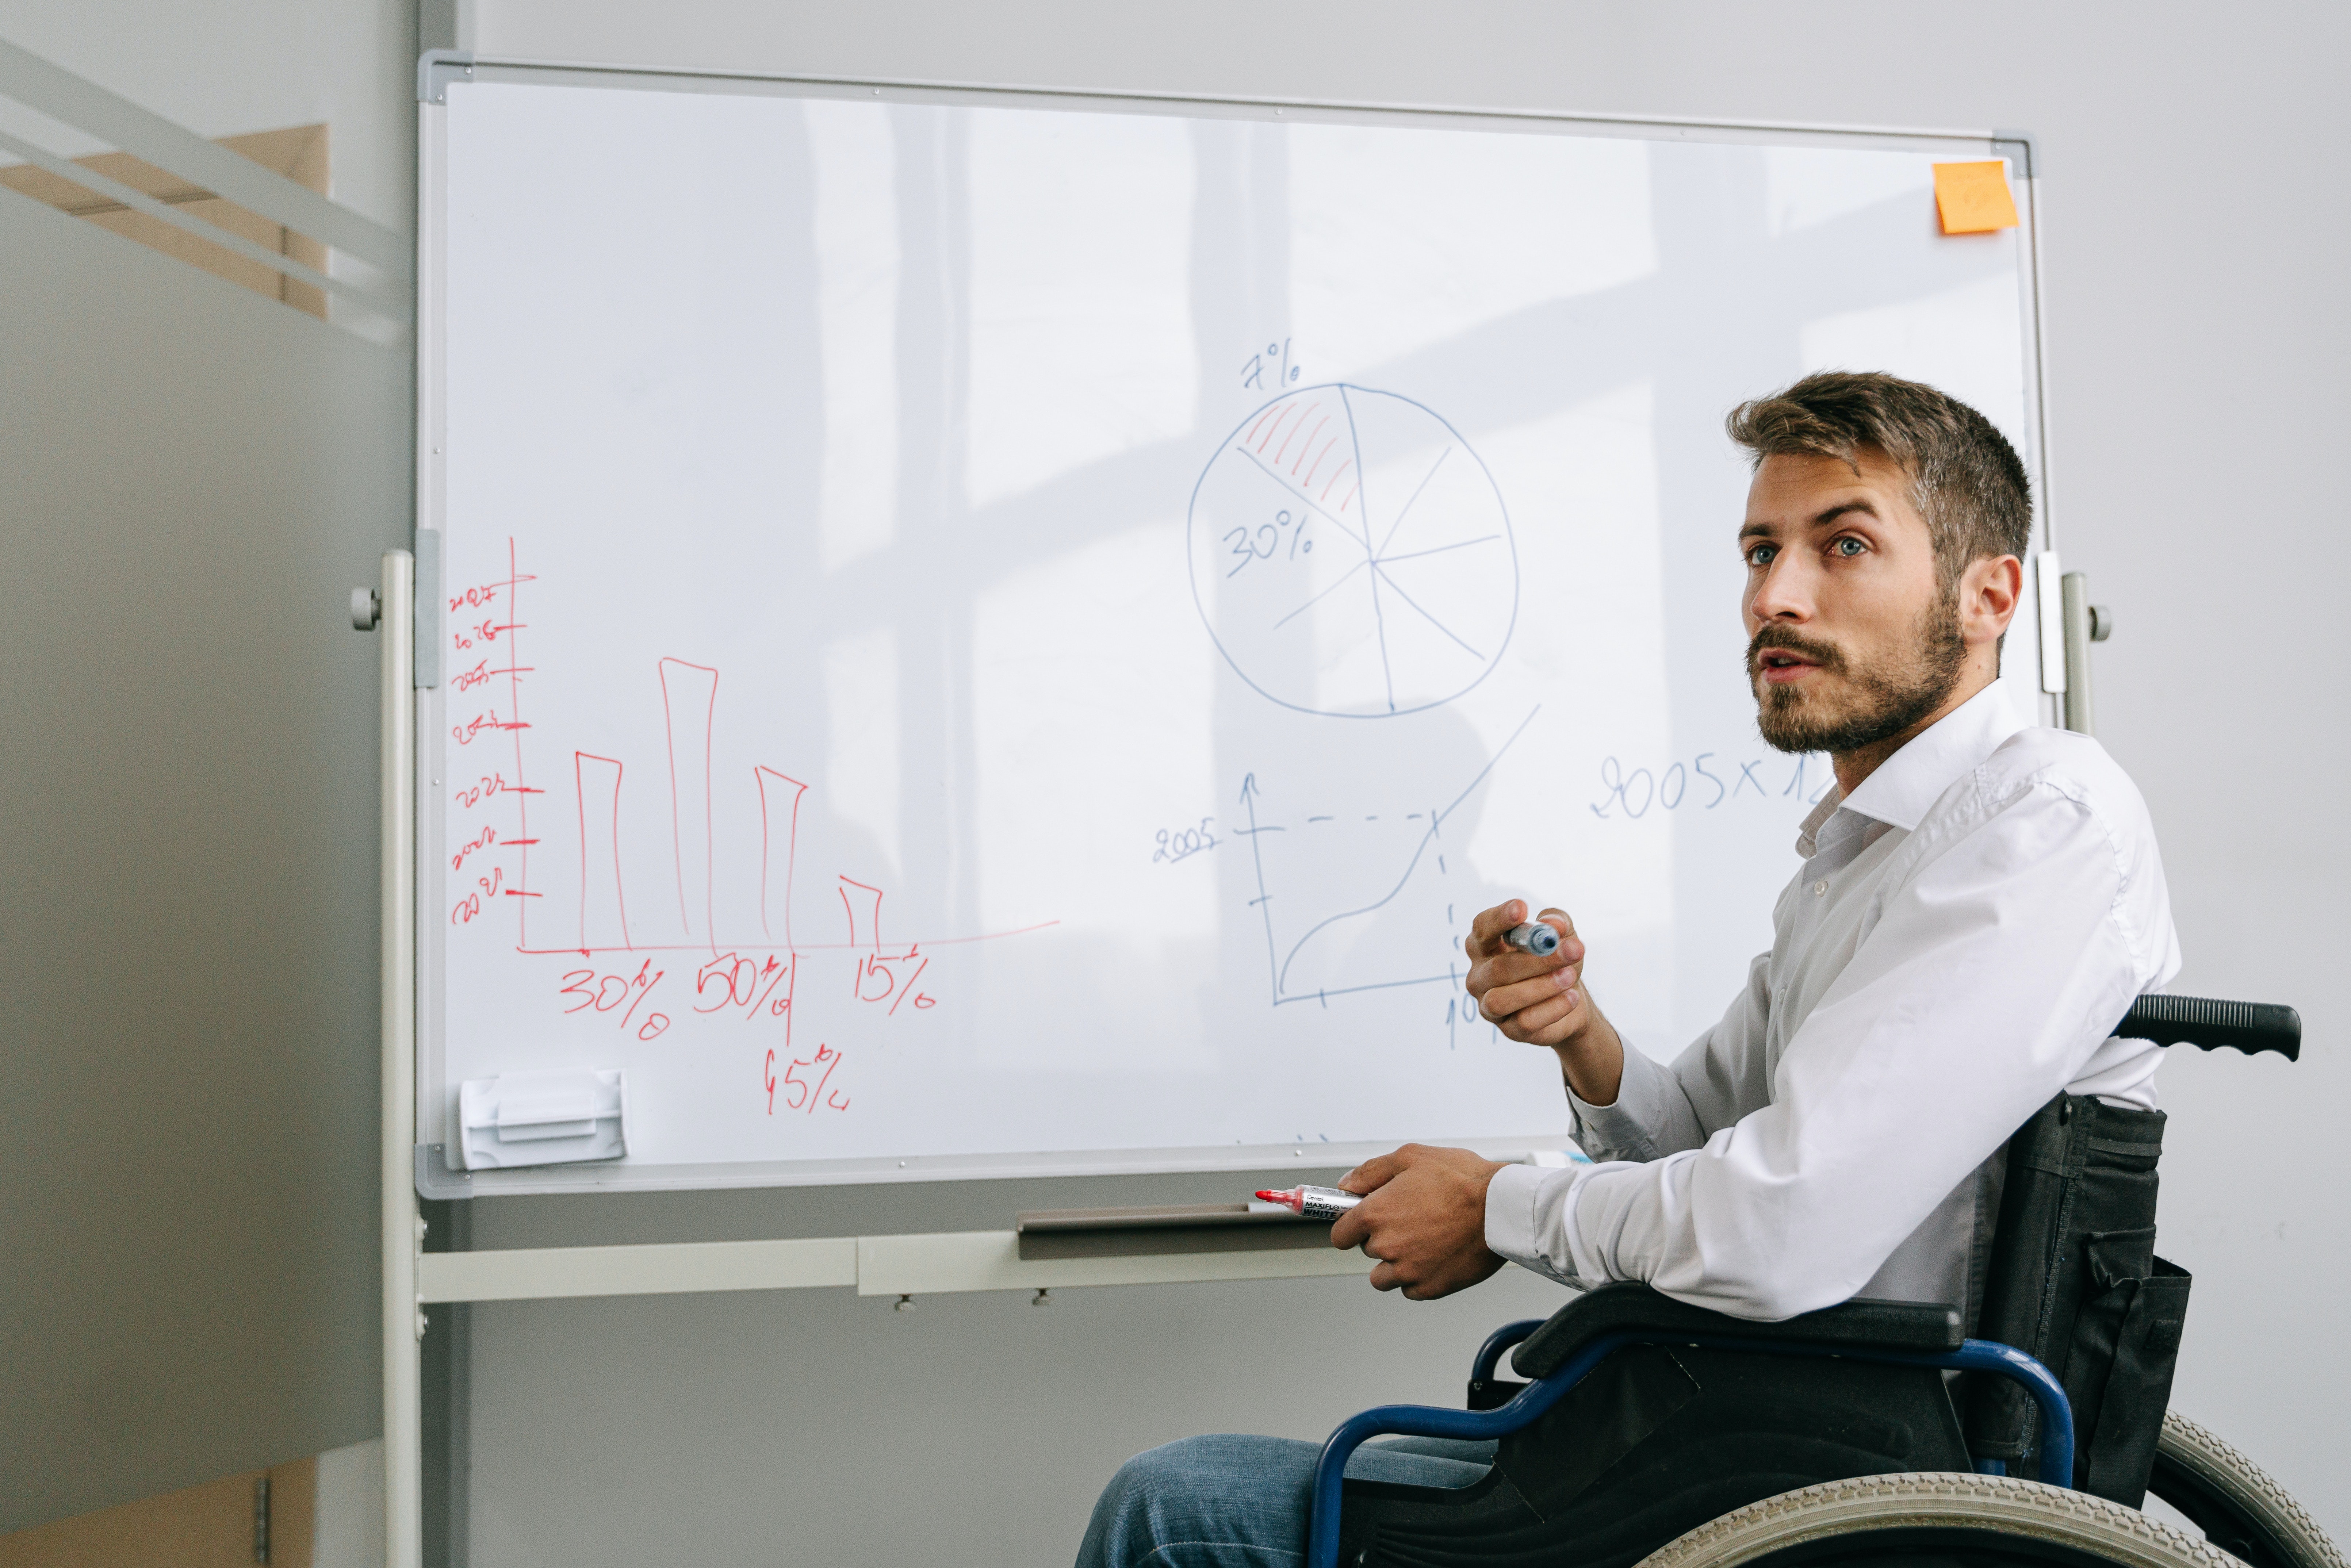 Aman in a wheelchair writing on a whiteboard